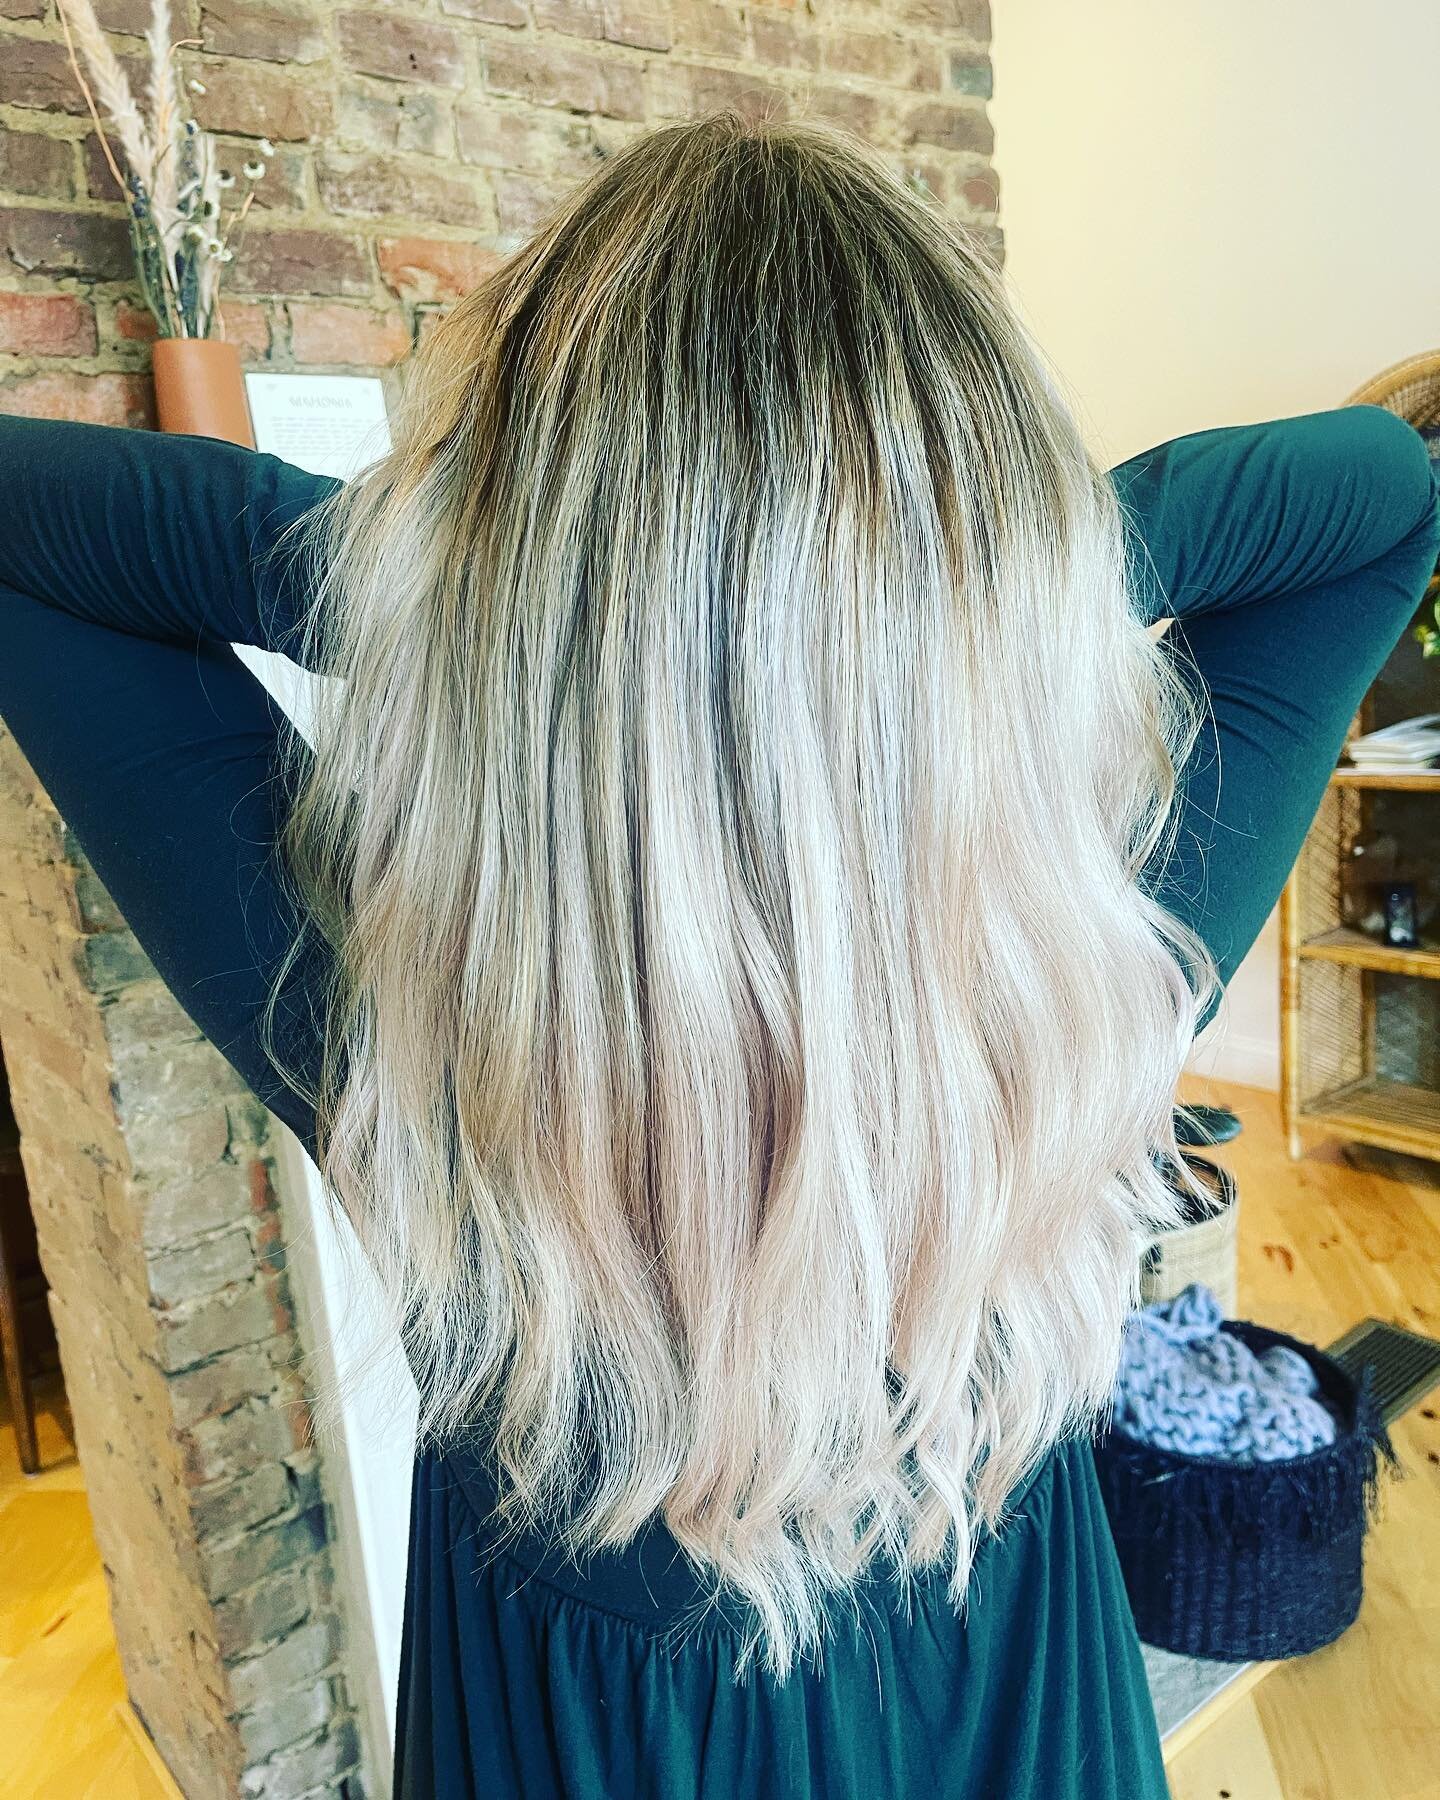 Partial highlights/toner and extensions cut and blend for a flawless transition ! You look beautiful Hilary Cooper! 🥰😉 @sportsmom43